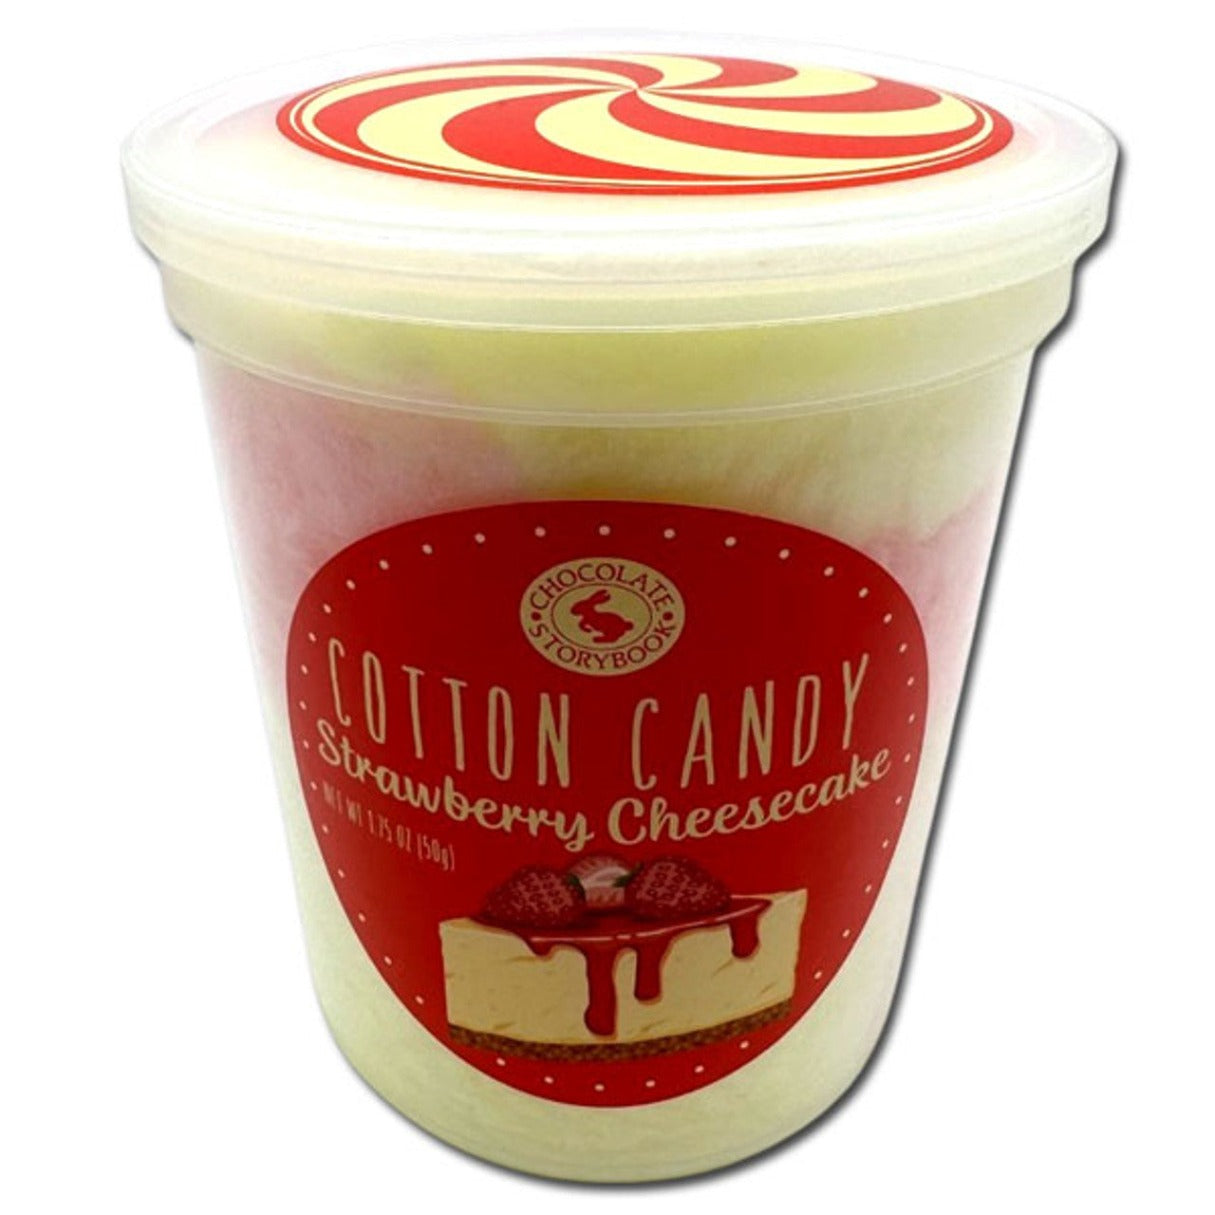 Cotton Candy Strawberry Cheesecake Flavored  1.75oz - 12ct